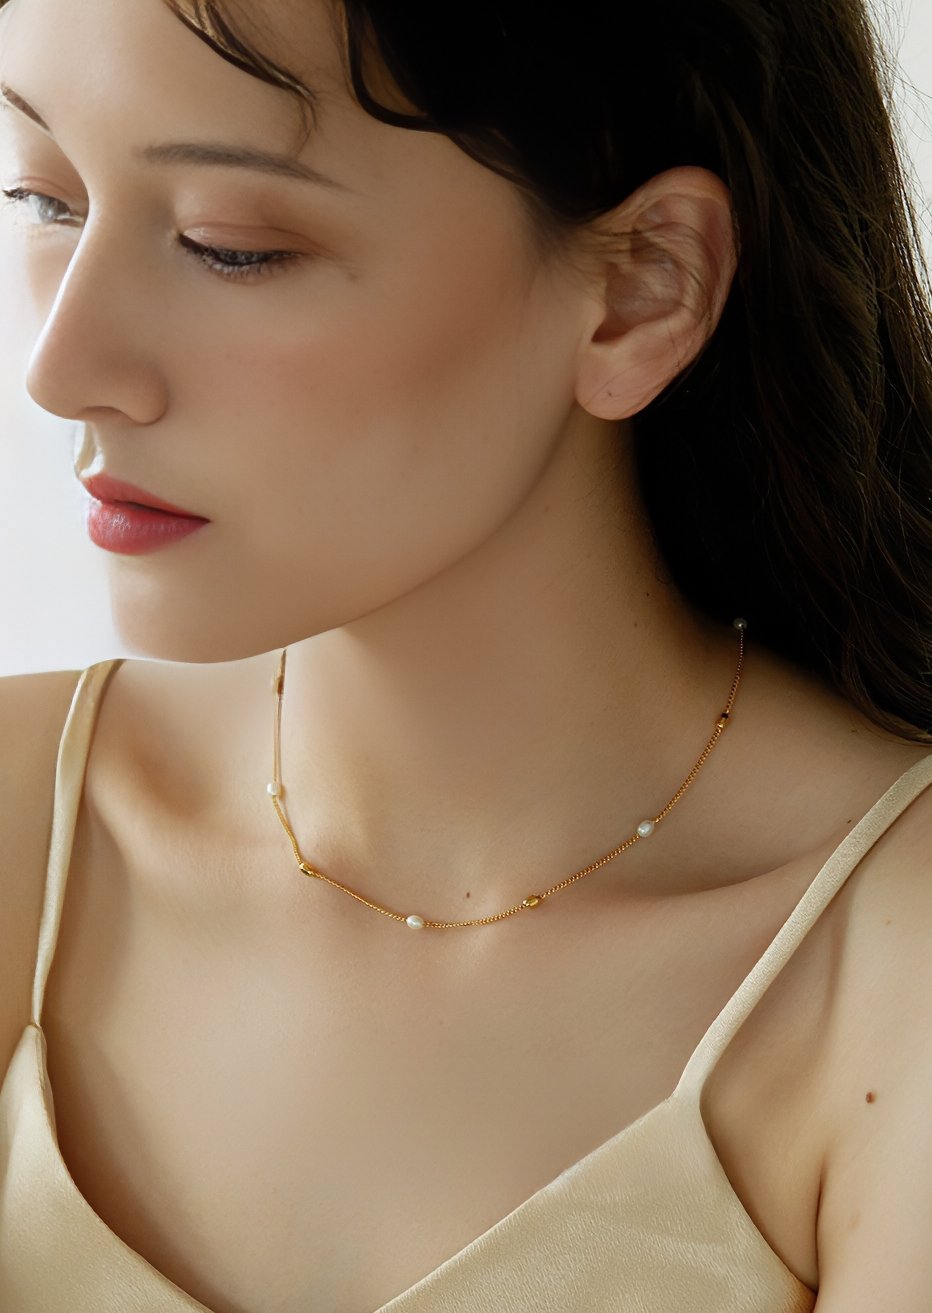 EVENLY SPACED PEARL NECKLACE - ANLEM